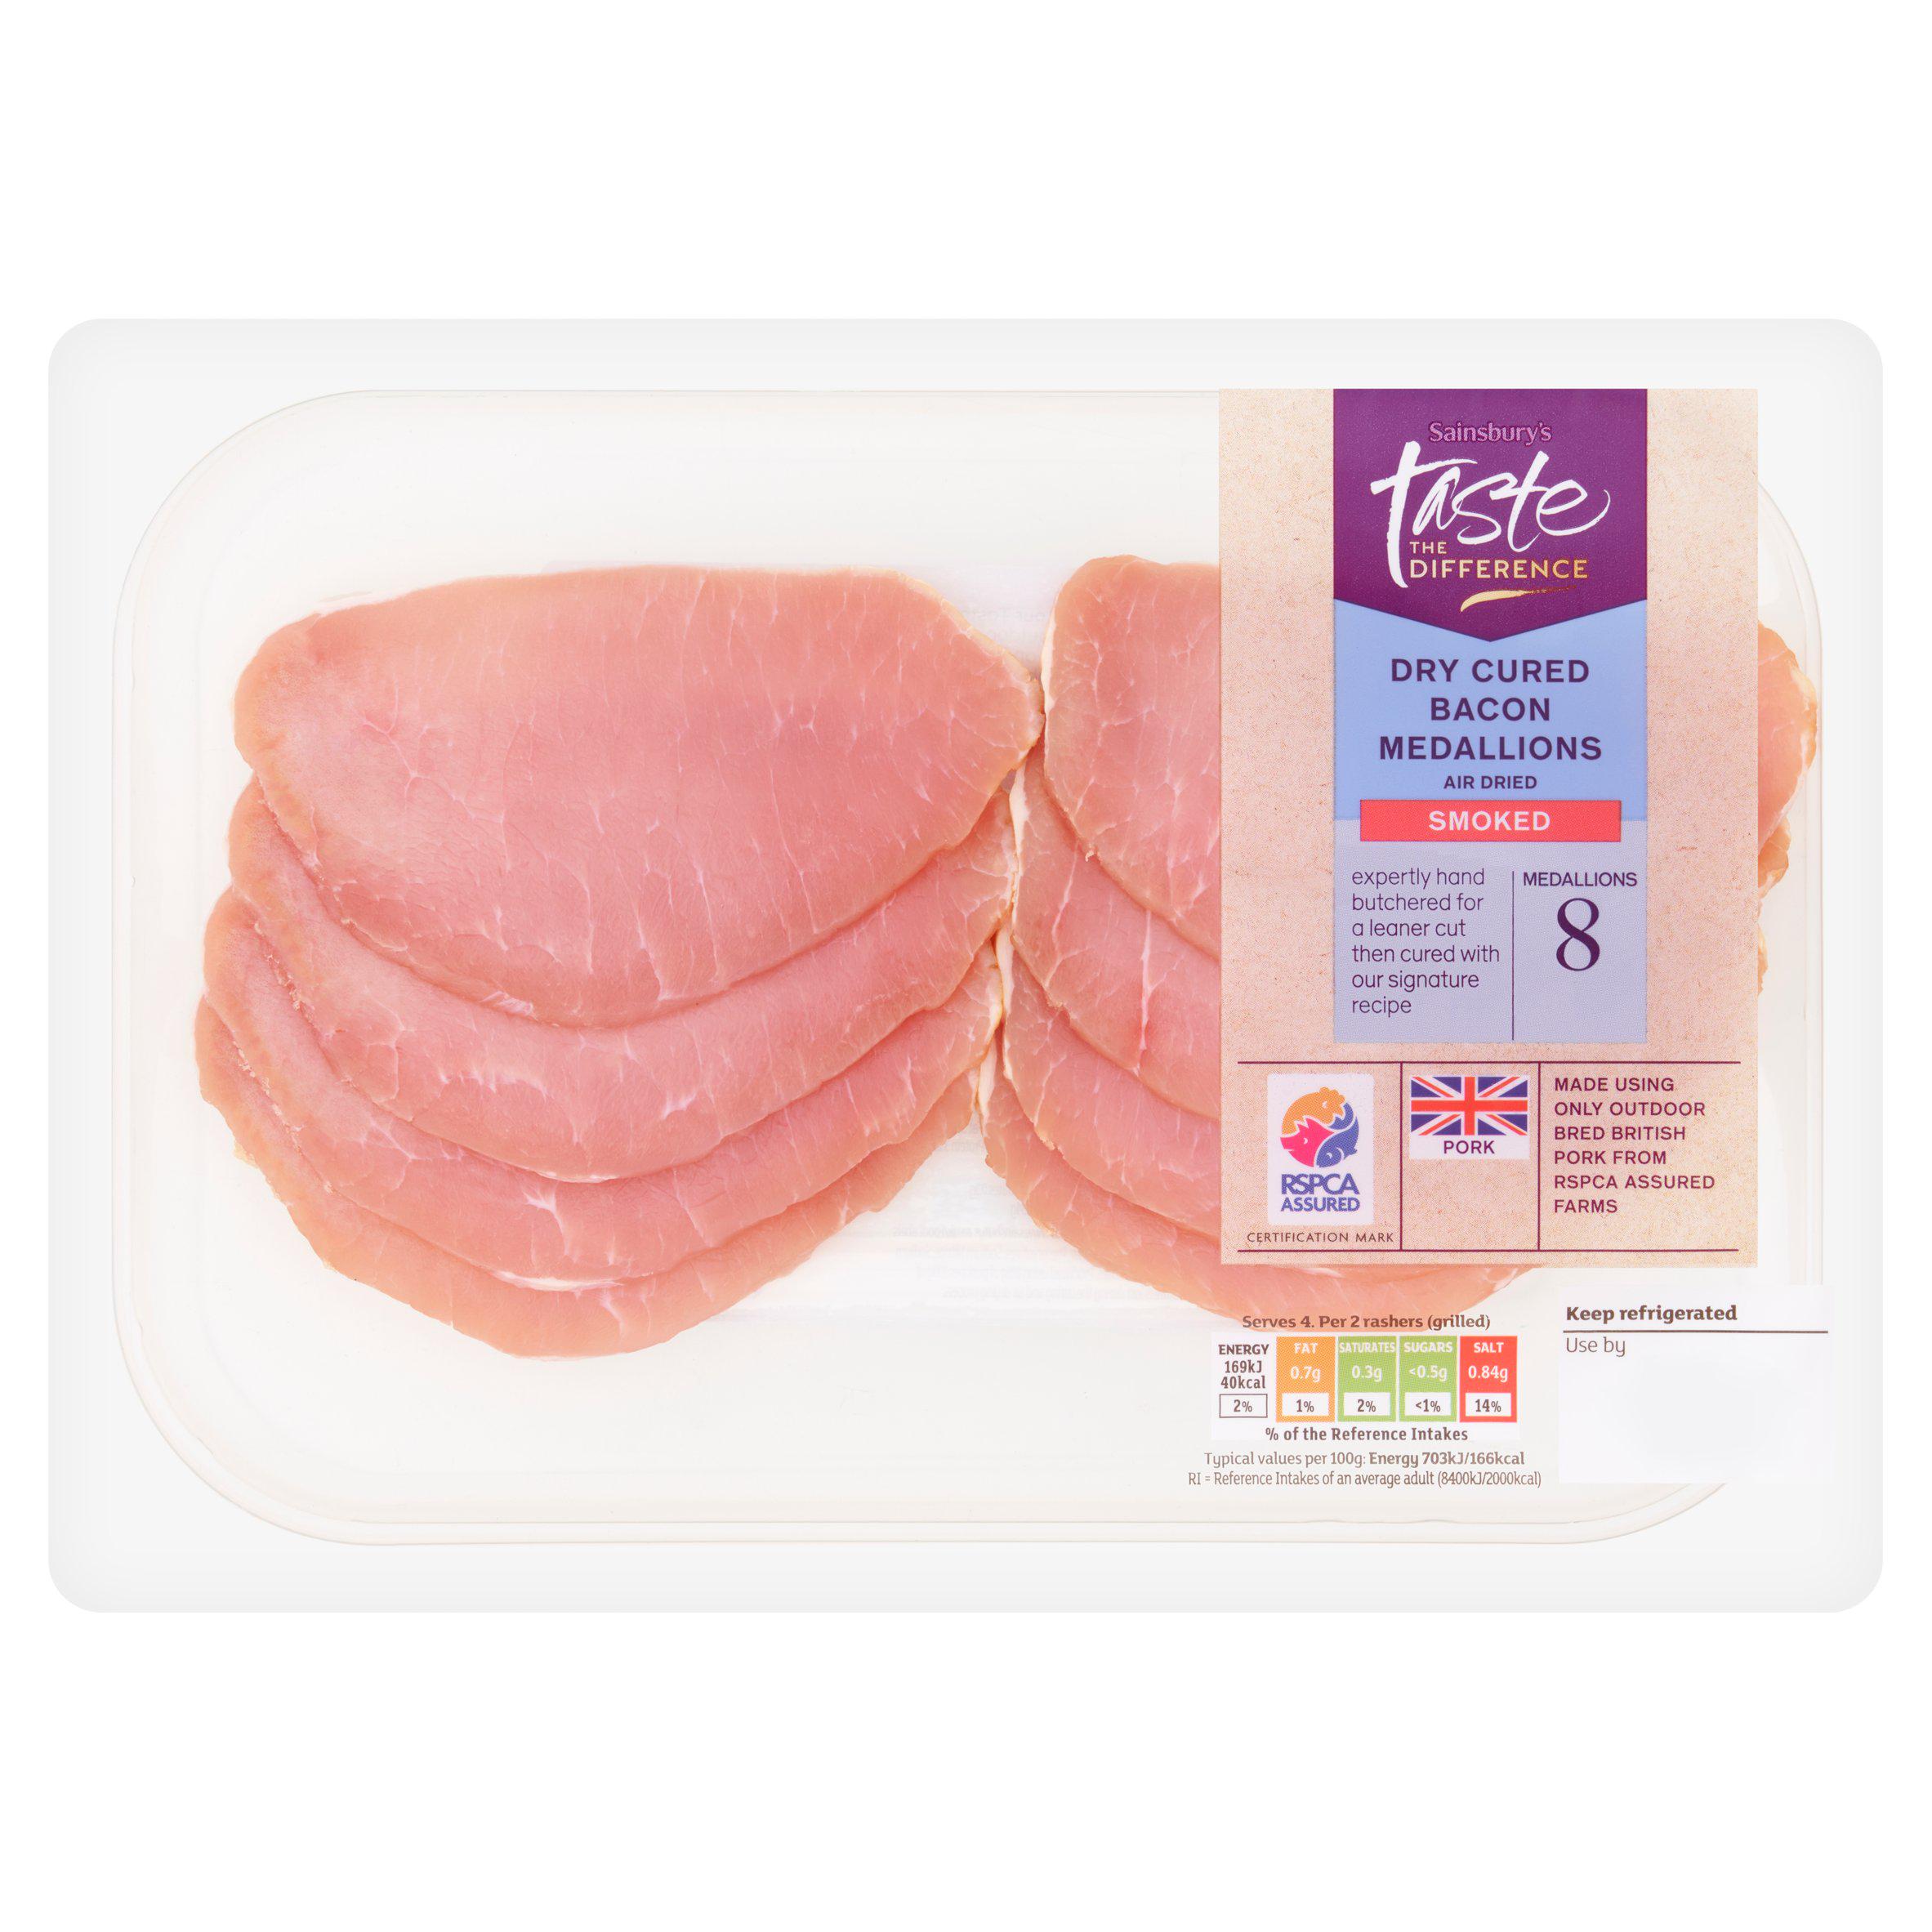 Sainsbury's Smoked Air Dried Bacon Medallions, Taste the Difference x8 160g